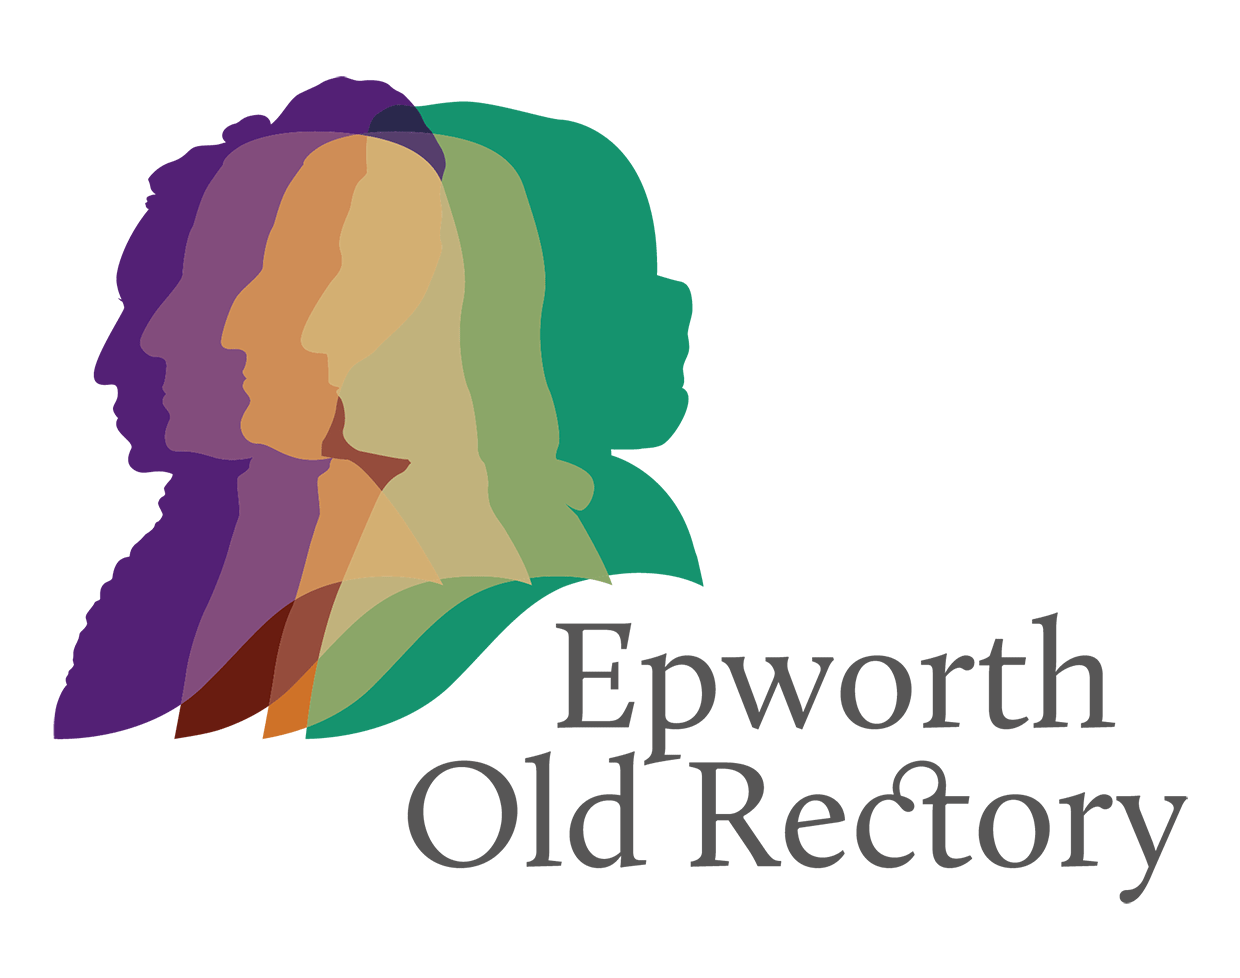 Welcome to Epworth Old Rectory